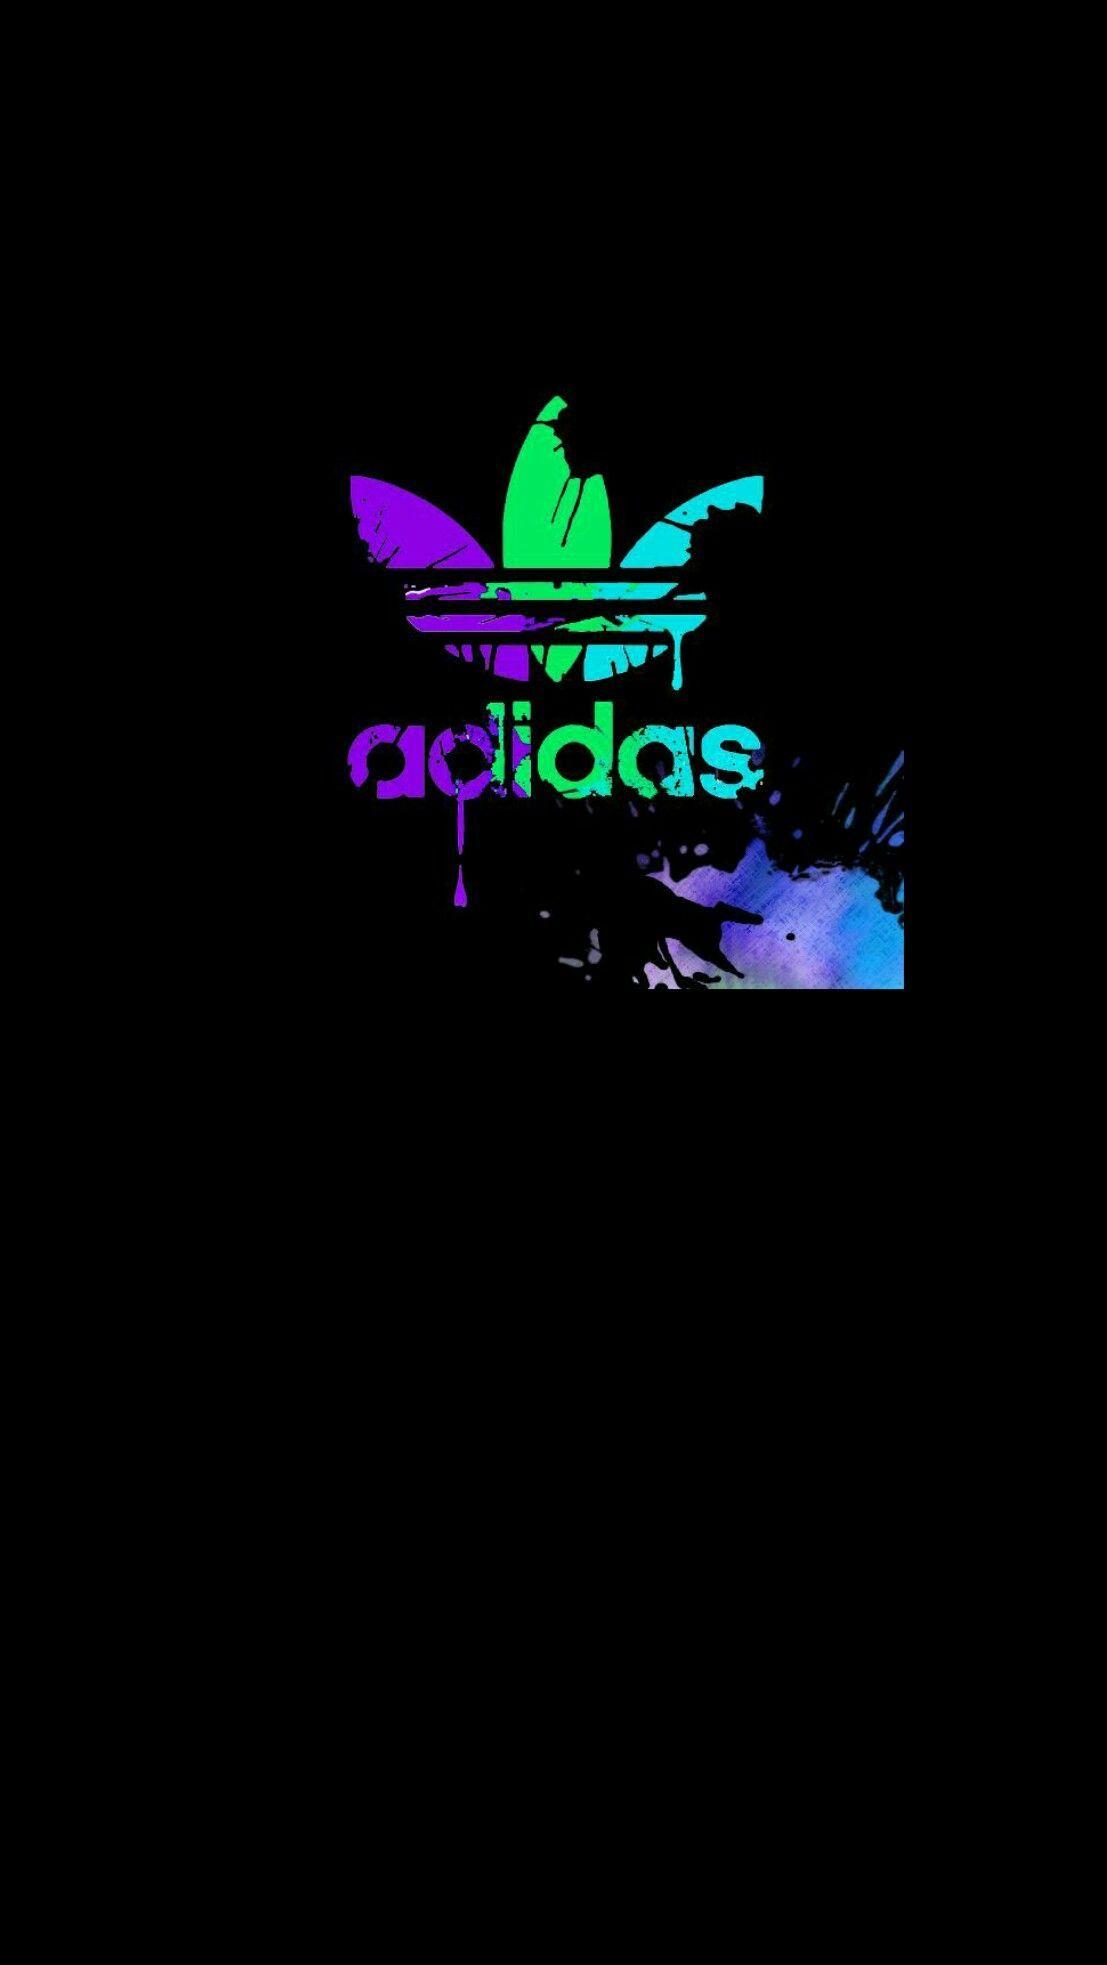 Adidas Android Wallpapers Top Free Adidas Android Backgrounds Wallpaperaccess